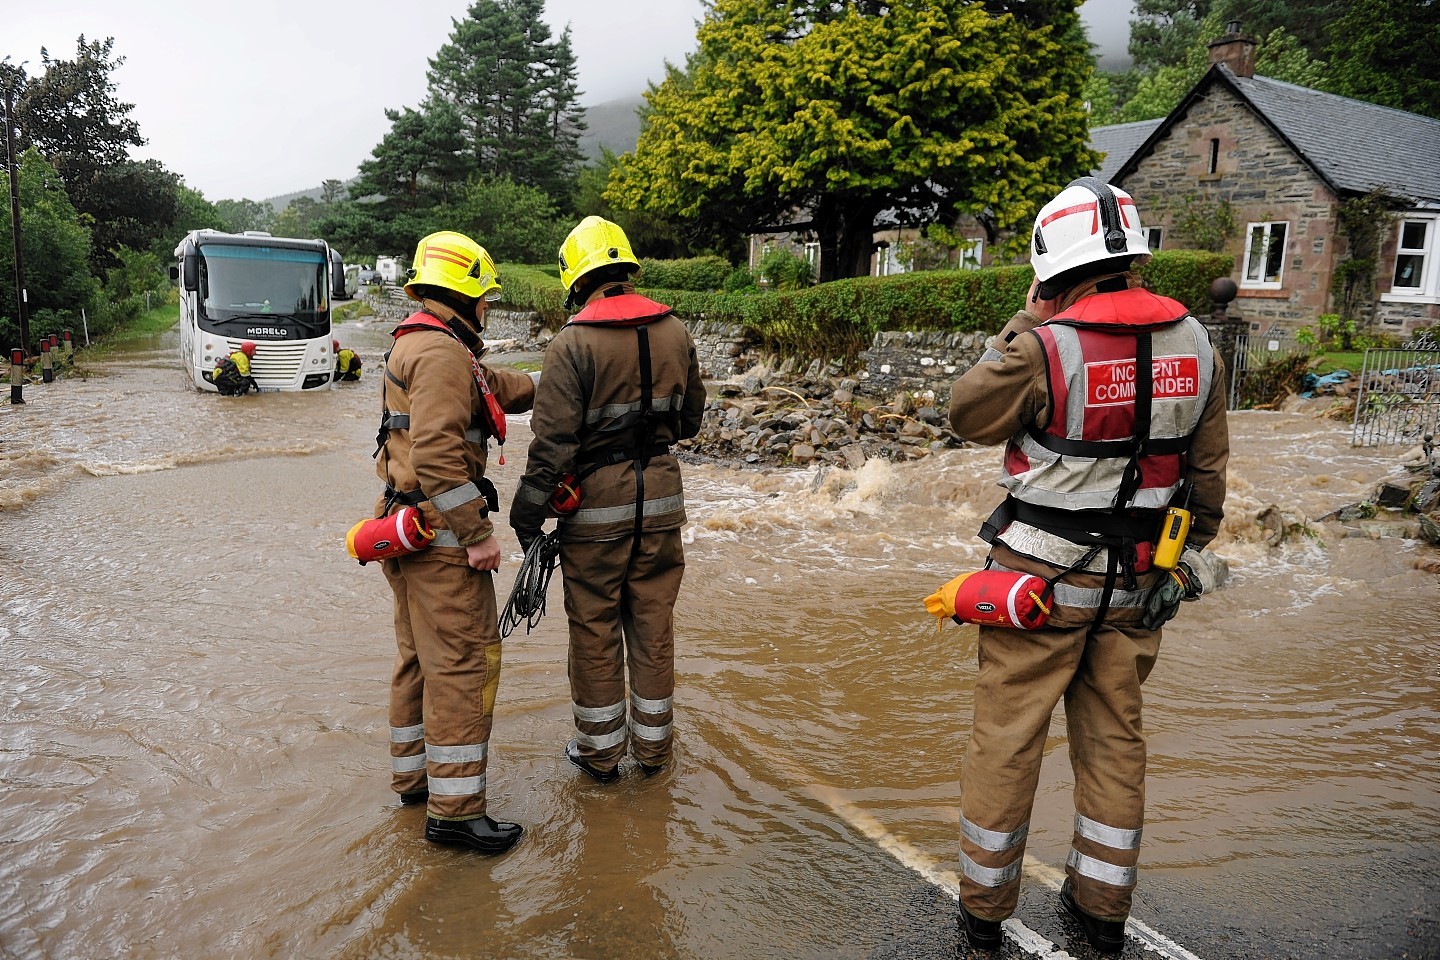 Firefighters deal with flooding near Ullapool